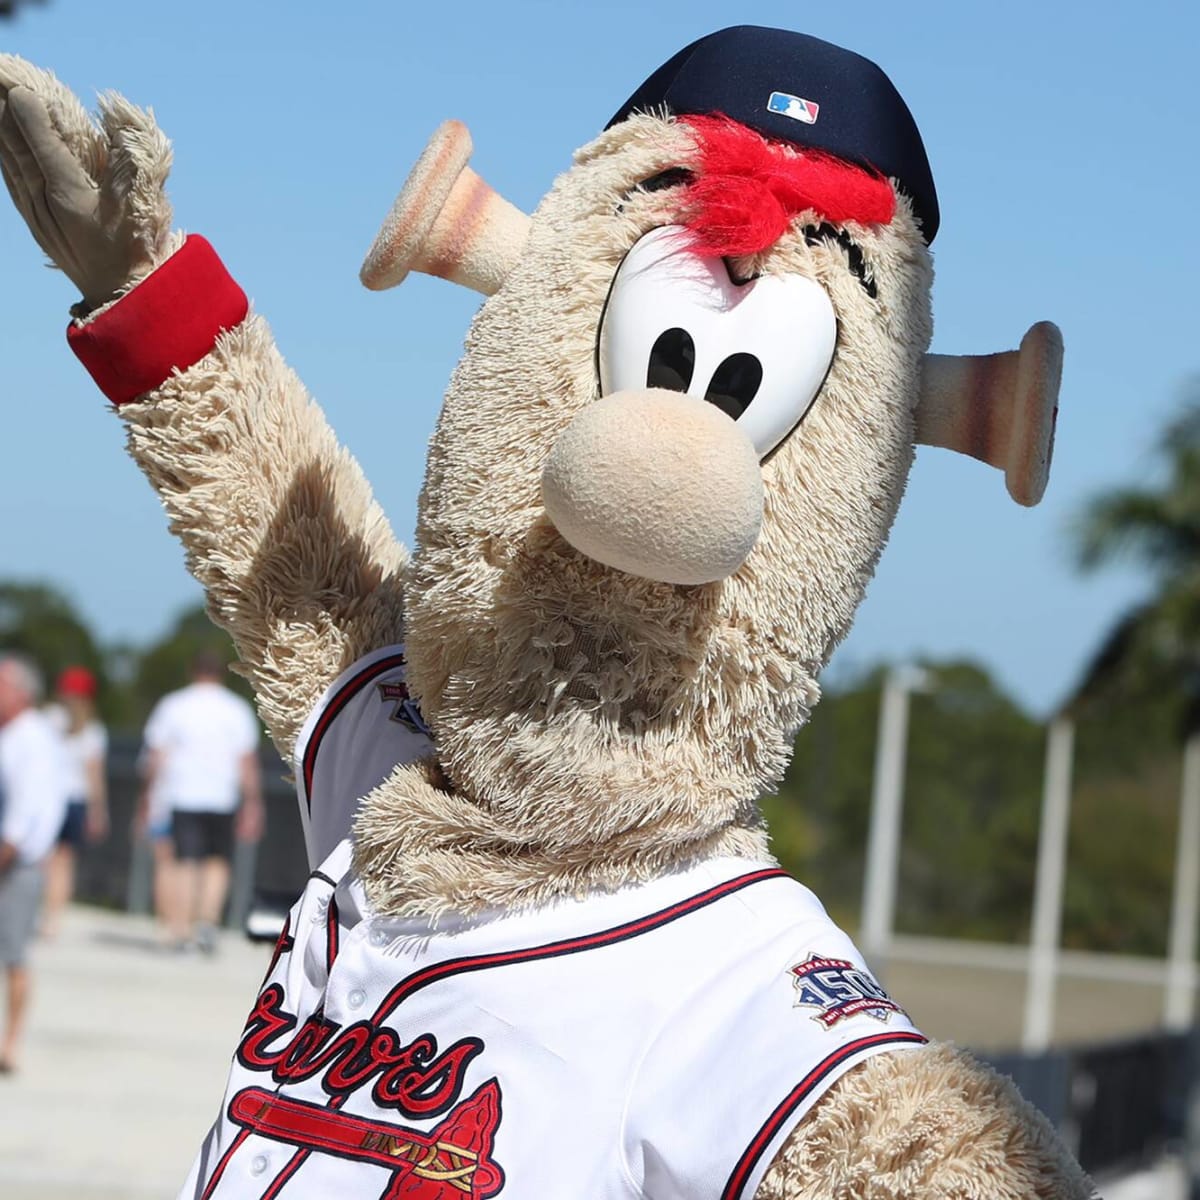 Braves mascot gets into bizarre social media fight with Phillies fans